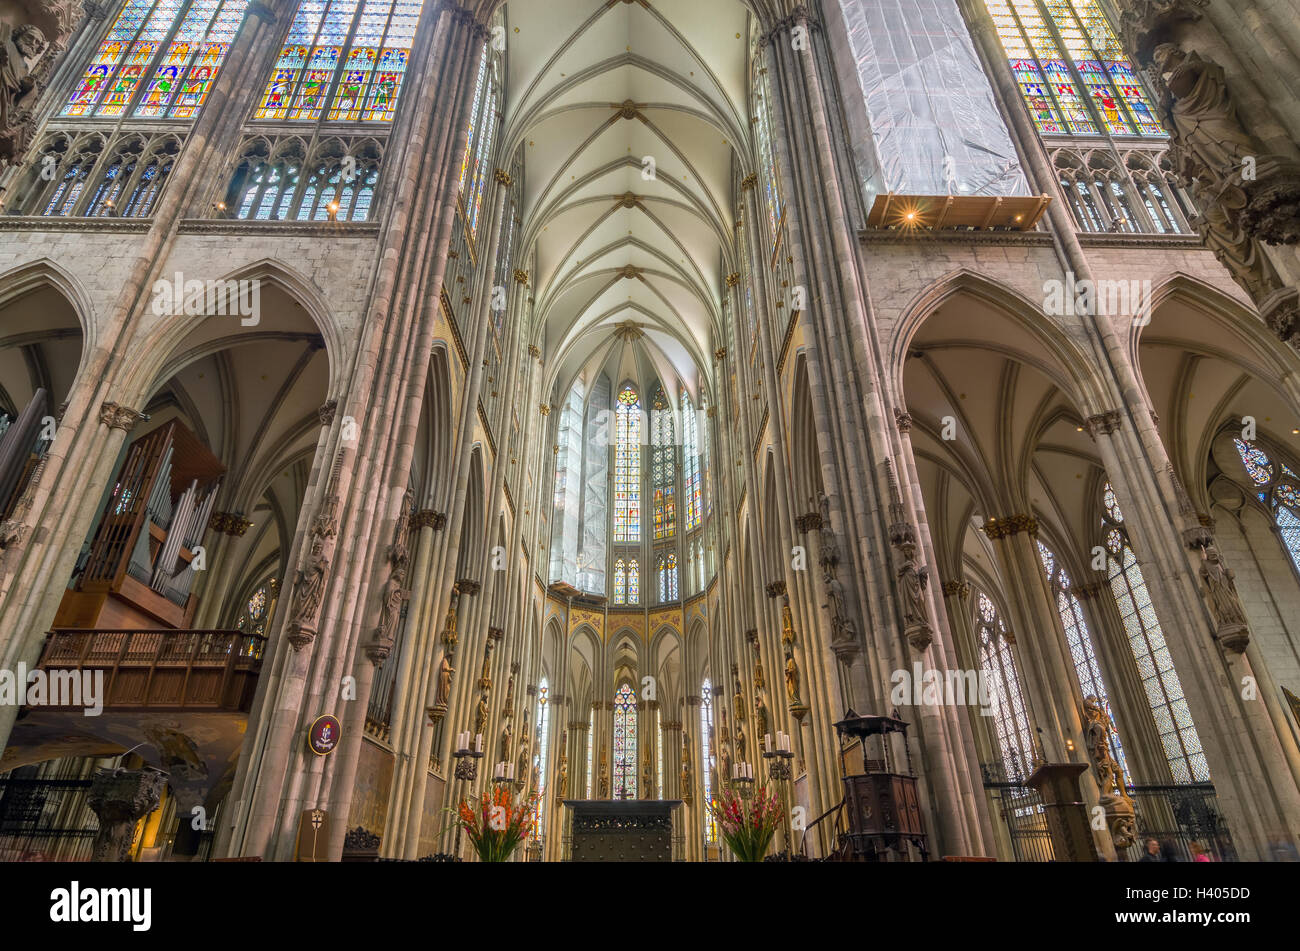 Interior of the Cologne Cathedral. Roman Catholic cathedral in gothic style. Nave, ceiling, organ, columns and stained glass. Stock Photo